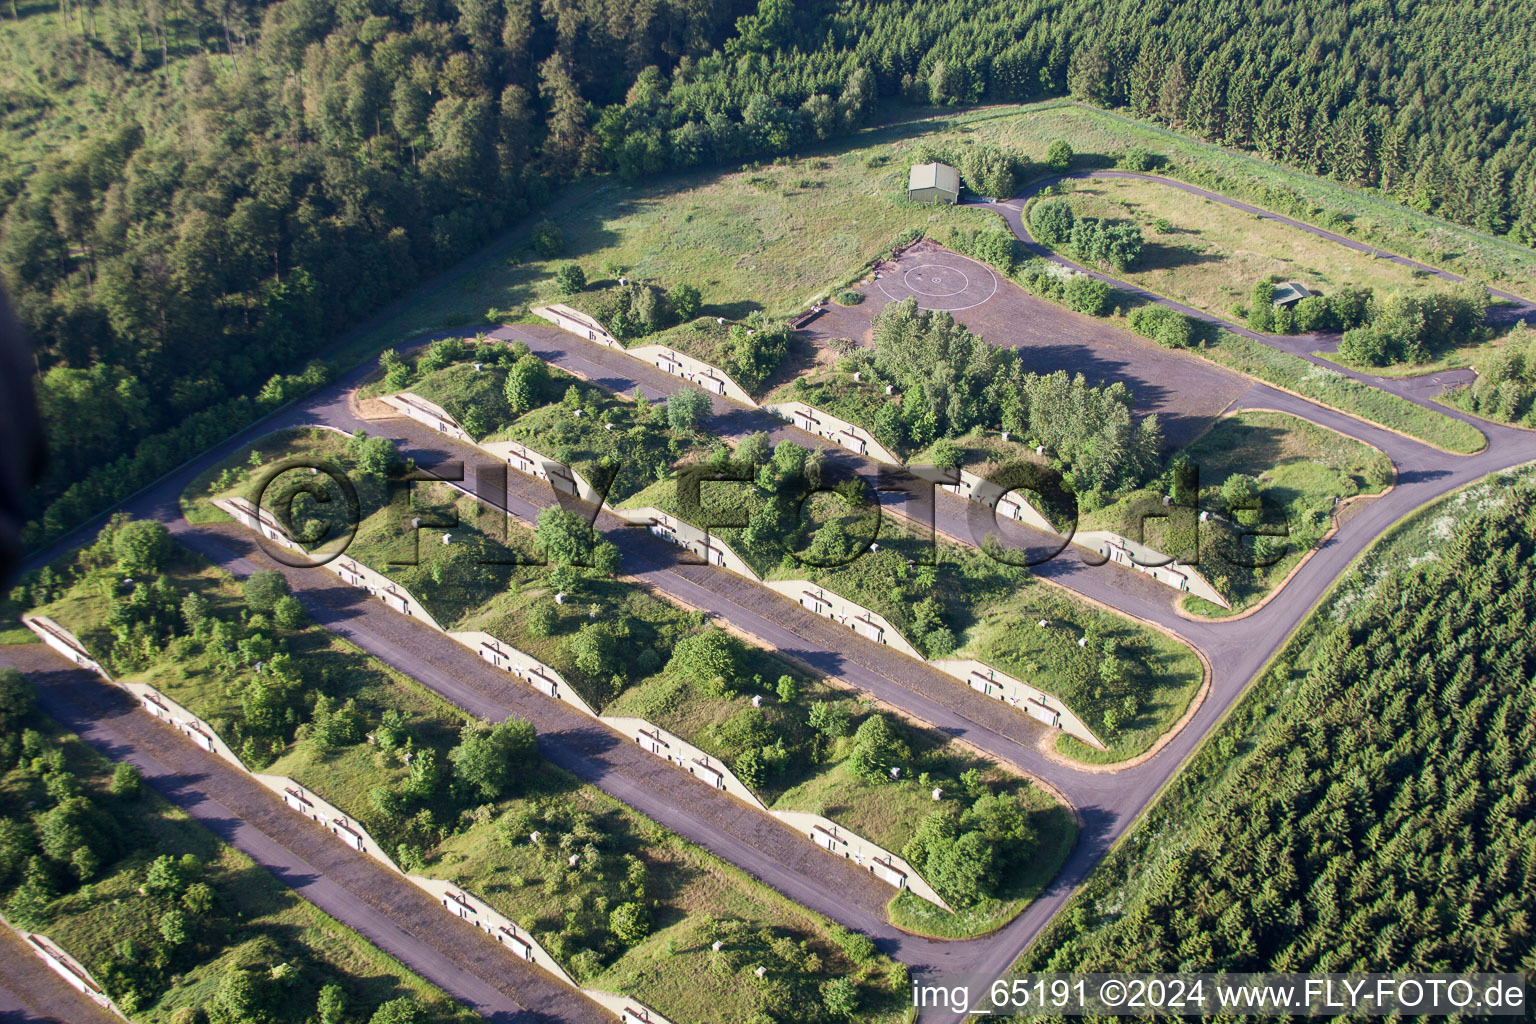 Aerial photograpy of Bunker complex and munitions depot on the military training grounds in the district Bellersen in Brakel in the state North Rhine-Westphalia